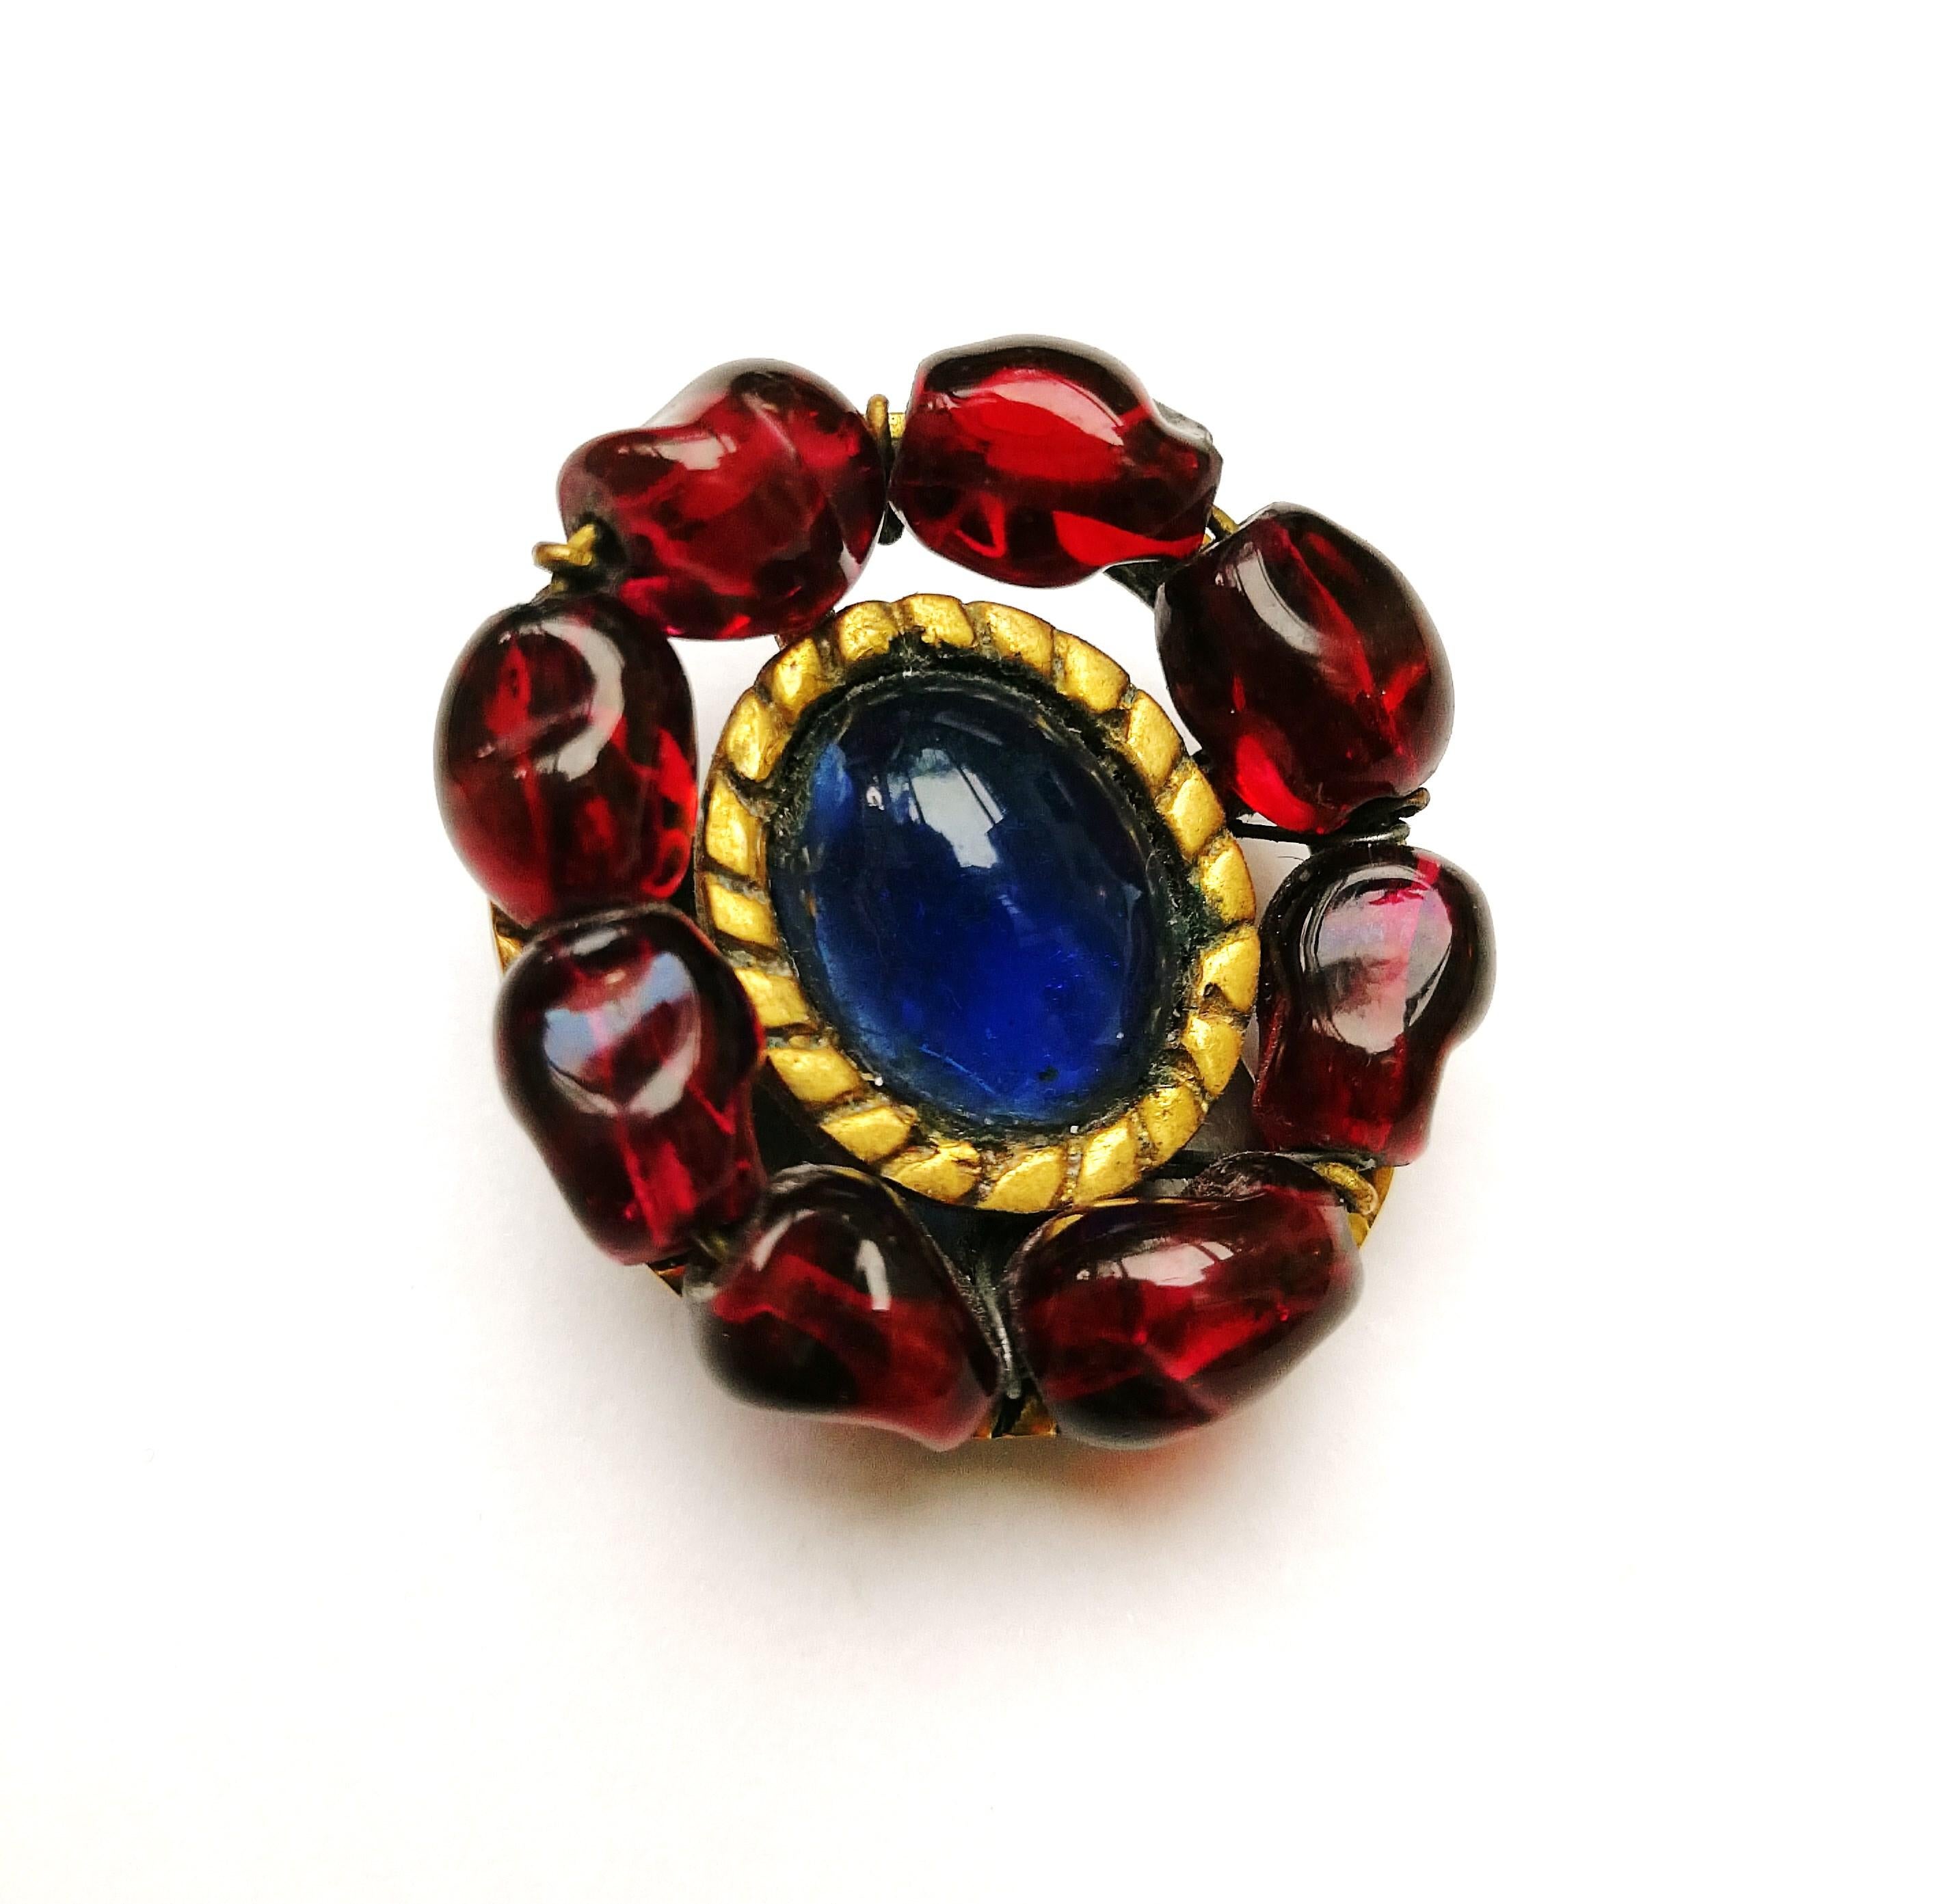 Ruby and sapphire poured glass earrings, att. Maison Gripoix for Chanel, 1930s. 3